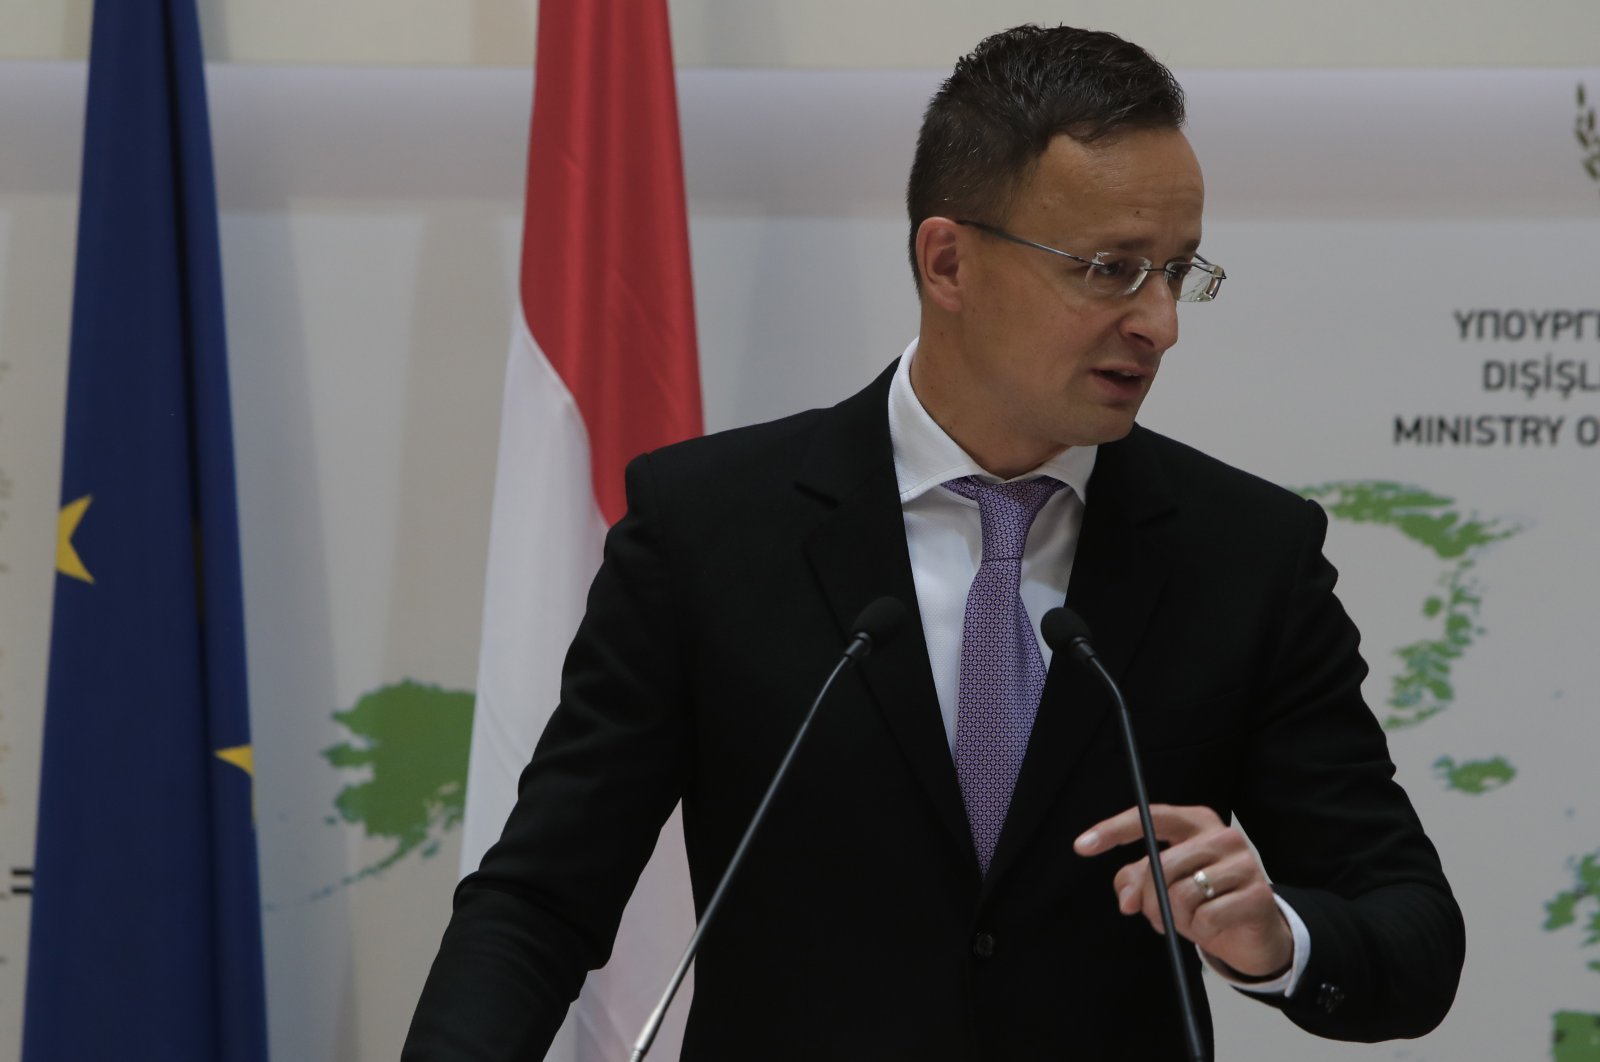 Hungarian Minister of Foreign Affairs and Trade Peter Szijjarto speaks during a news conference in Greek Cyprus, June 26, 2020. (AP Photo)